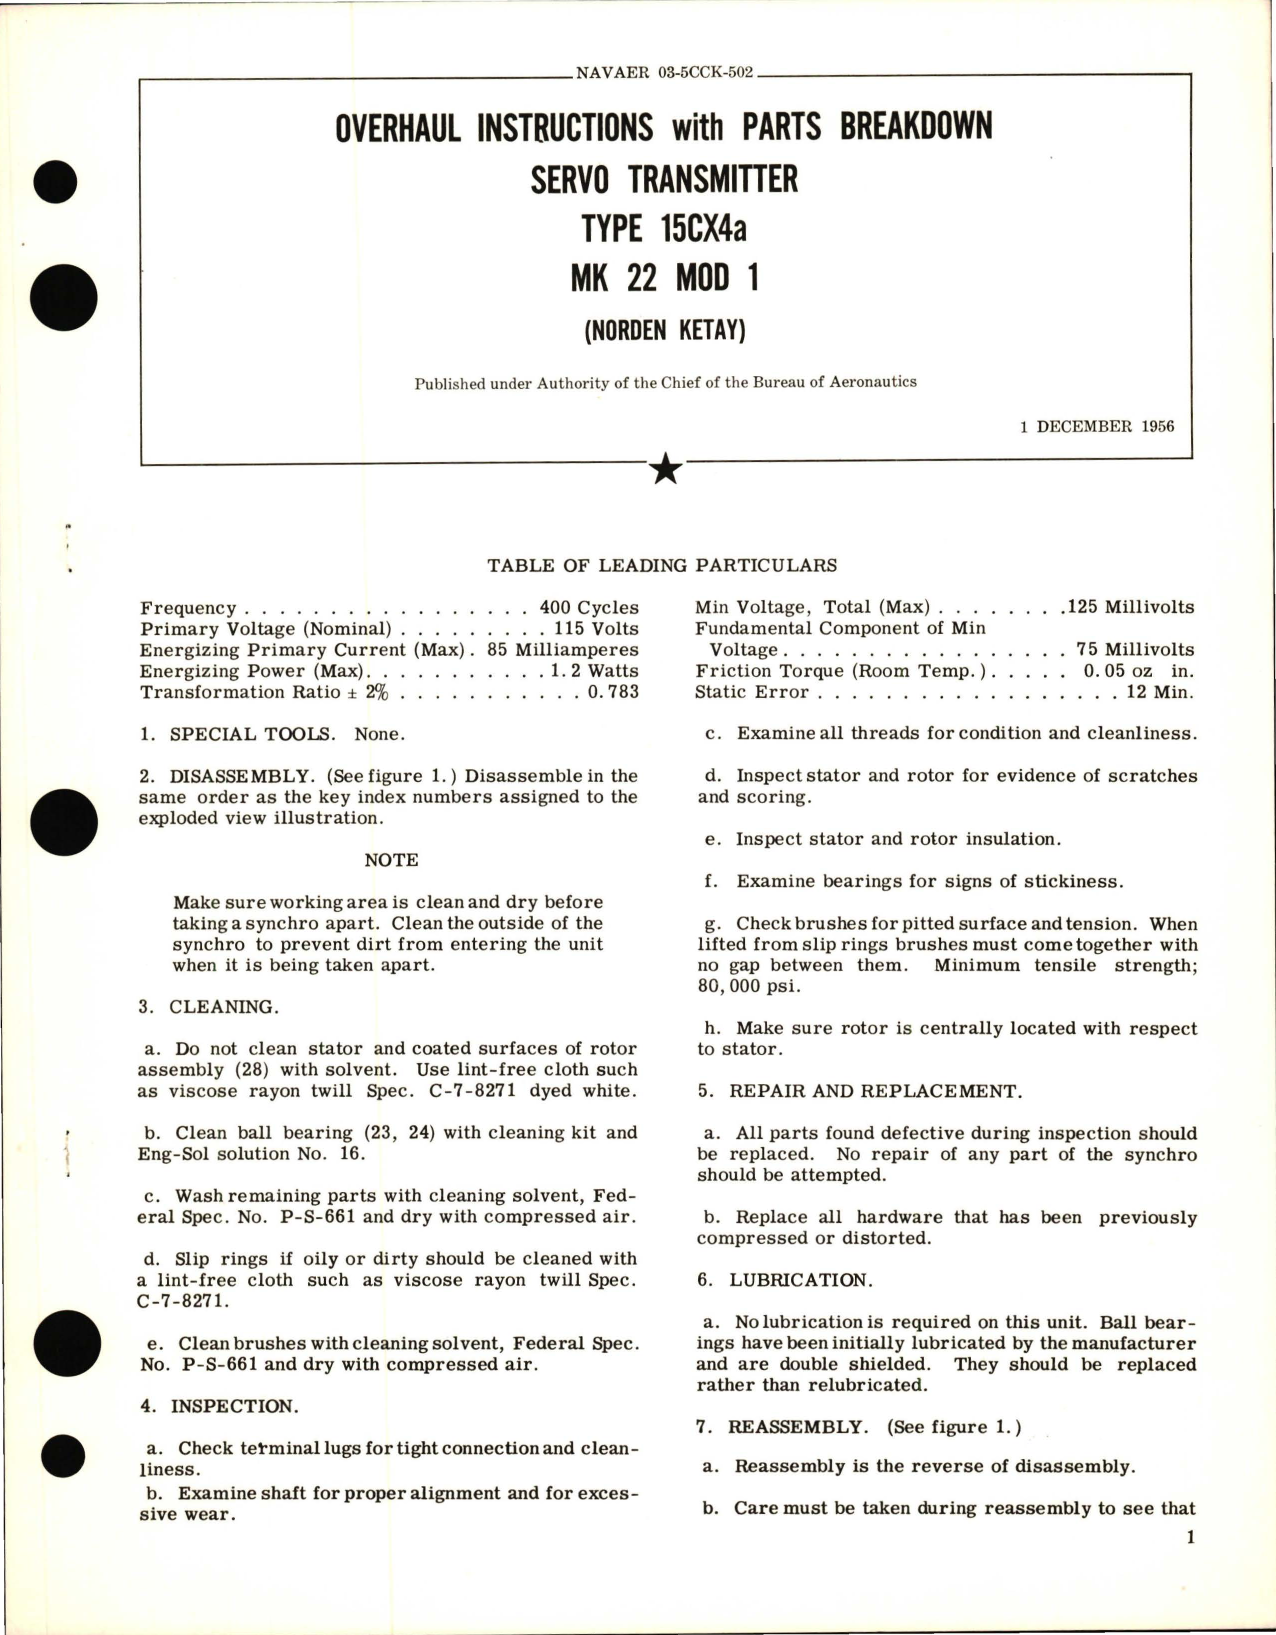 Sample page 1 from AirCorps Library document: Overhaul Instructions with Parts Breakdown for Servo Transmitter - Type 15CX4a - MK 22 MOD 1 